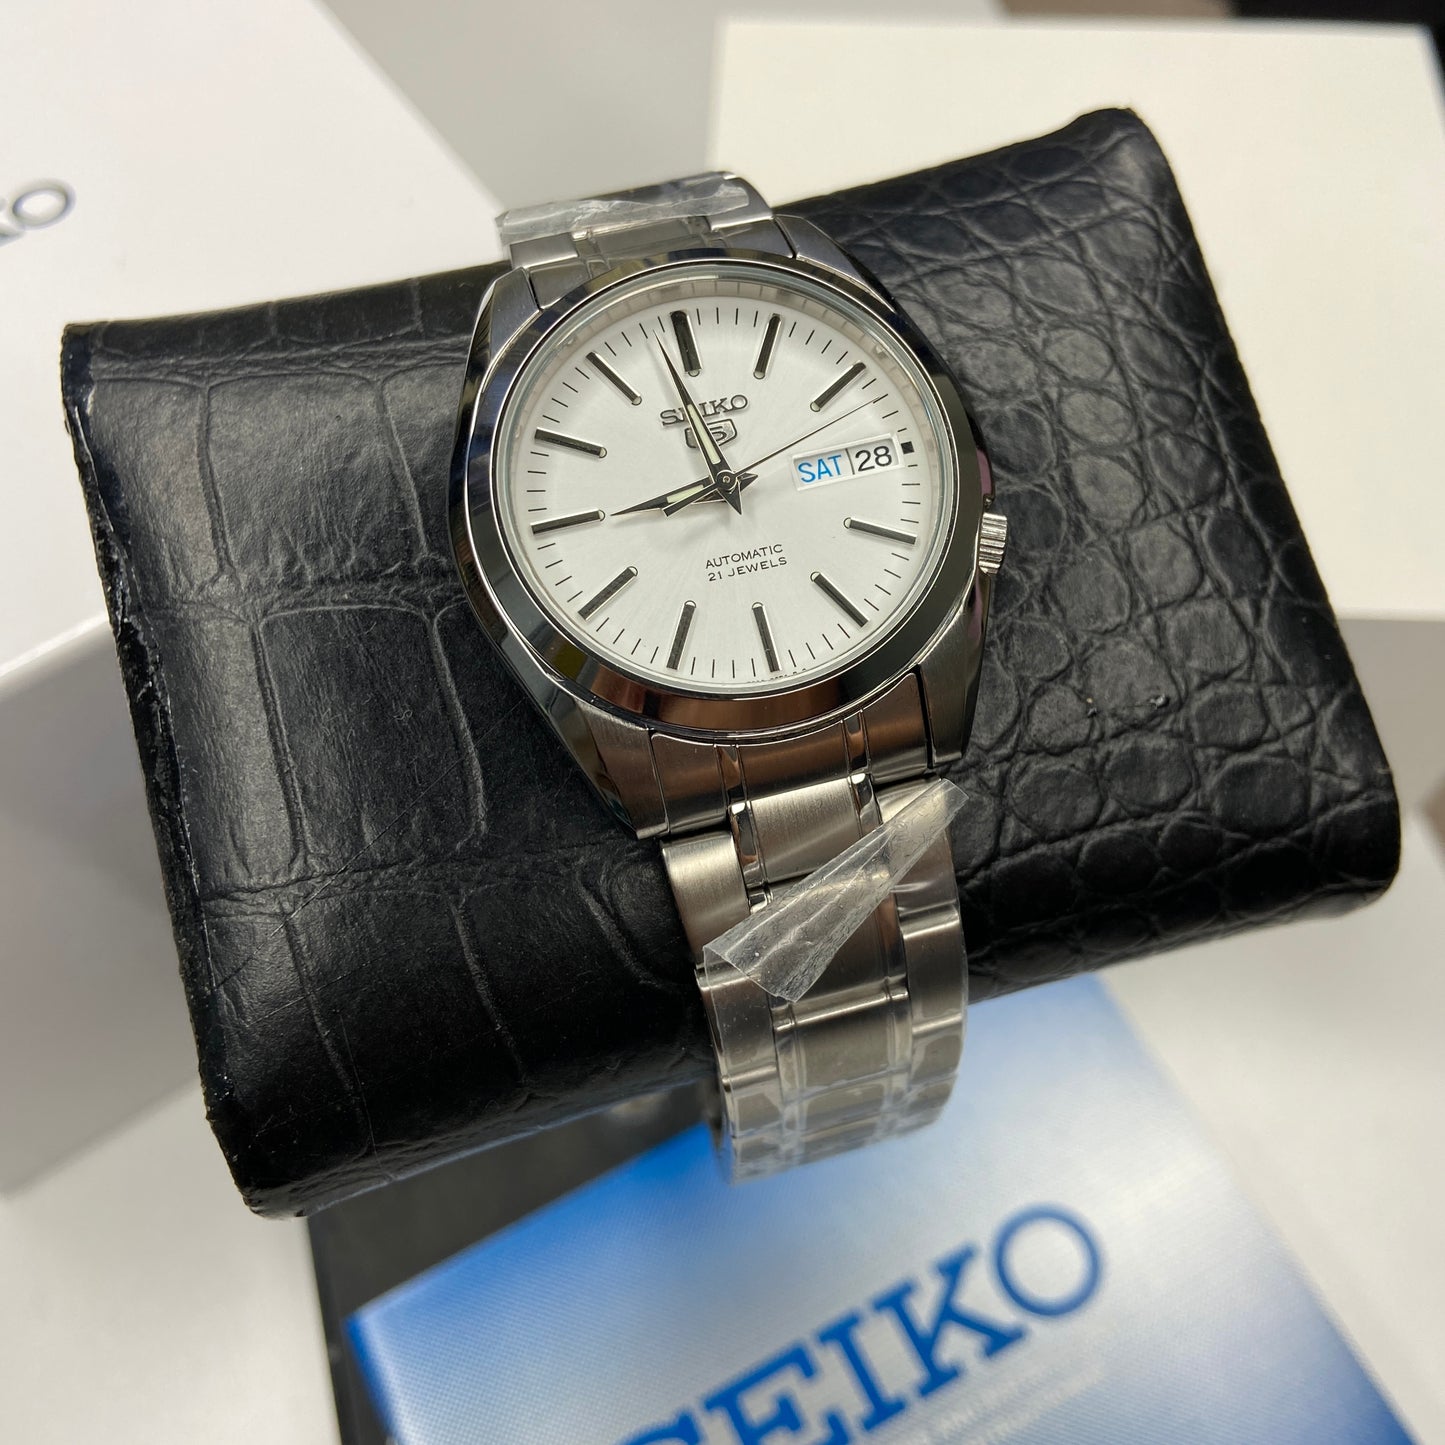 Seiko 5 SNKL41K1 White Dial Automatic See-thru Back Case Stainless Steel Bracelet Watch